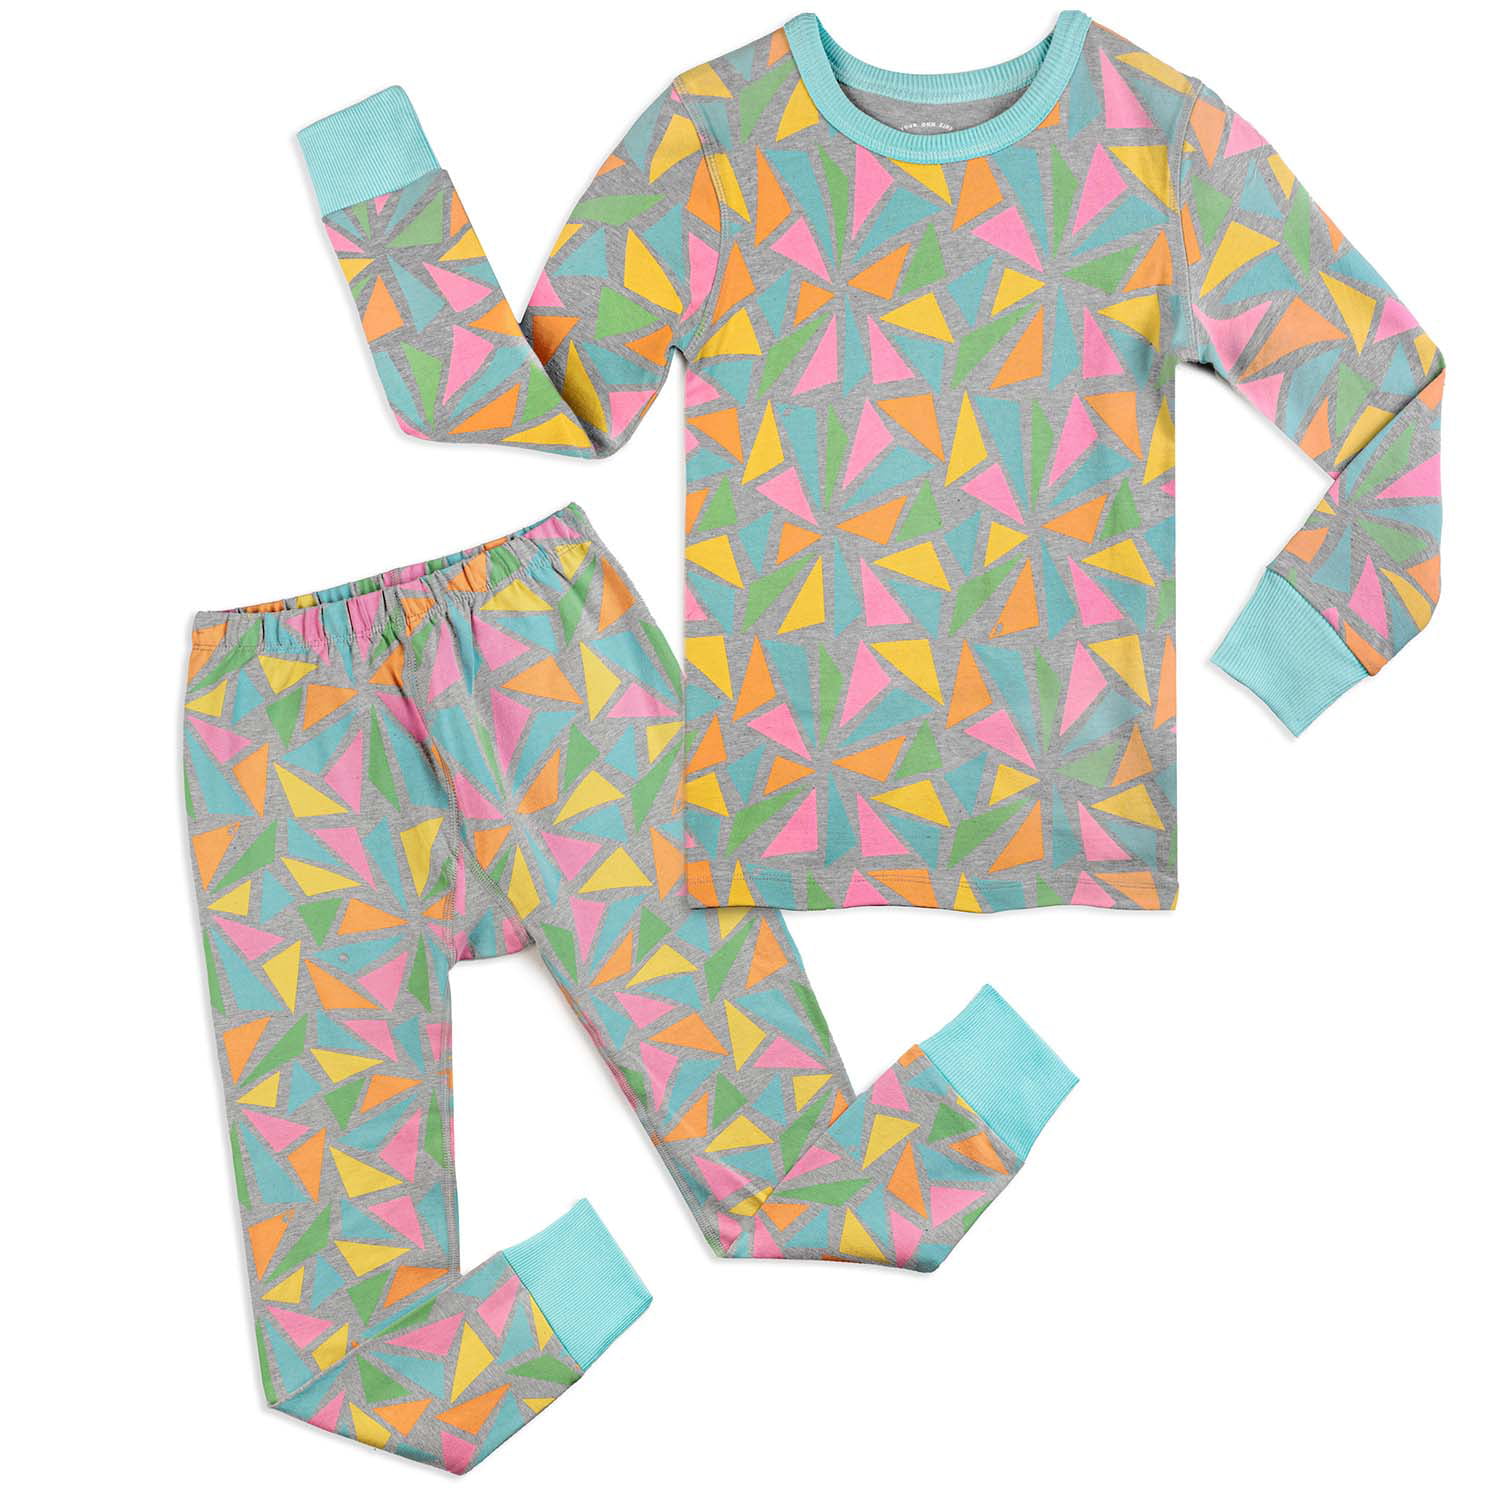 Organic Cotton Fair Trade Certified Footless PJs for Toddlers and Kids Mightly Girls' Pajamas 